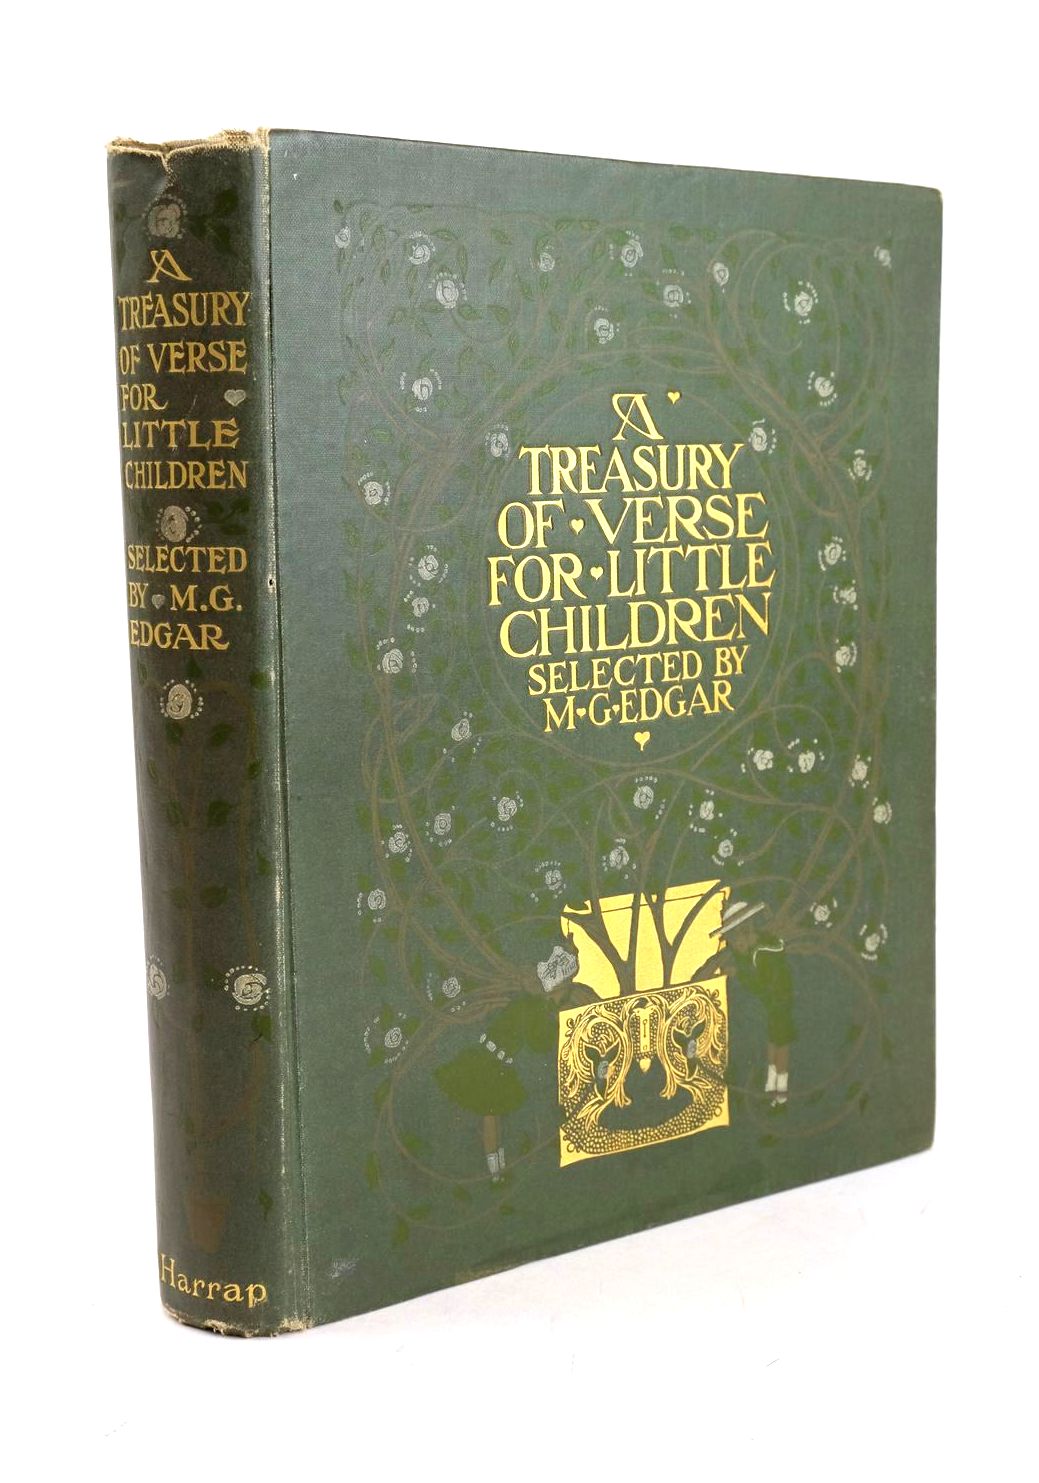 Photo of A TREASURY OF VERSE FOR LITTLE CHILDREN written by Edgar, M.G. illustrated by Pogany, Willy published by Thomas Y. Crowell Co. (STOCK CODE: 1326735)  for sale by Stella & Rose's Books